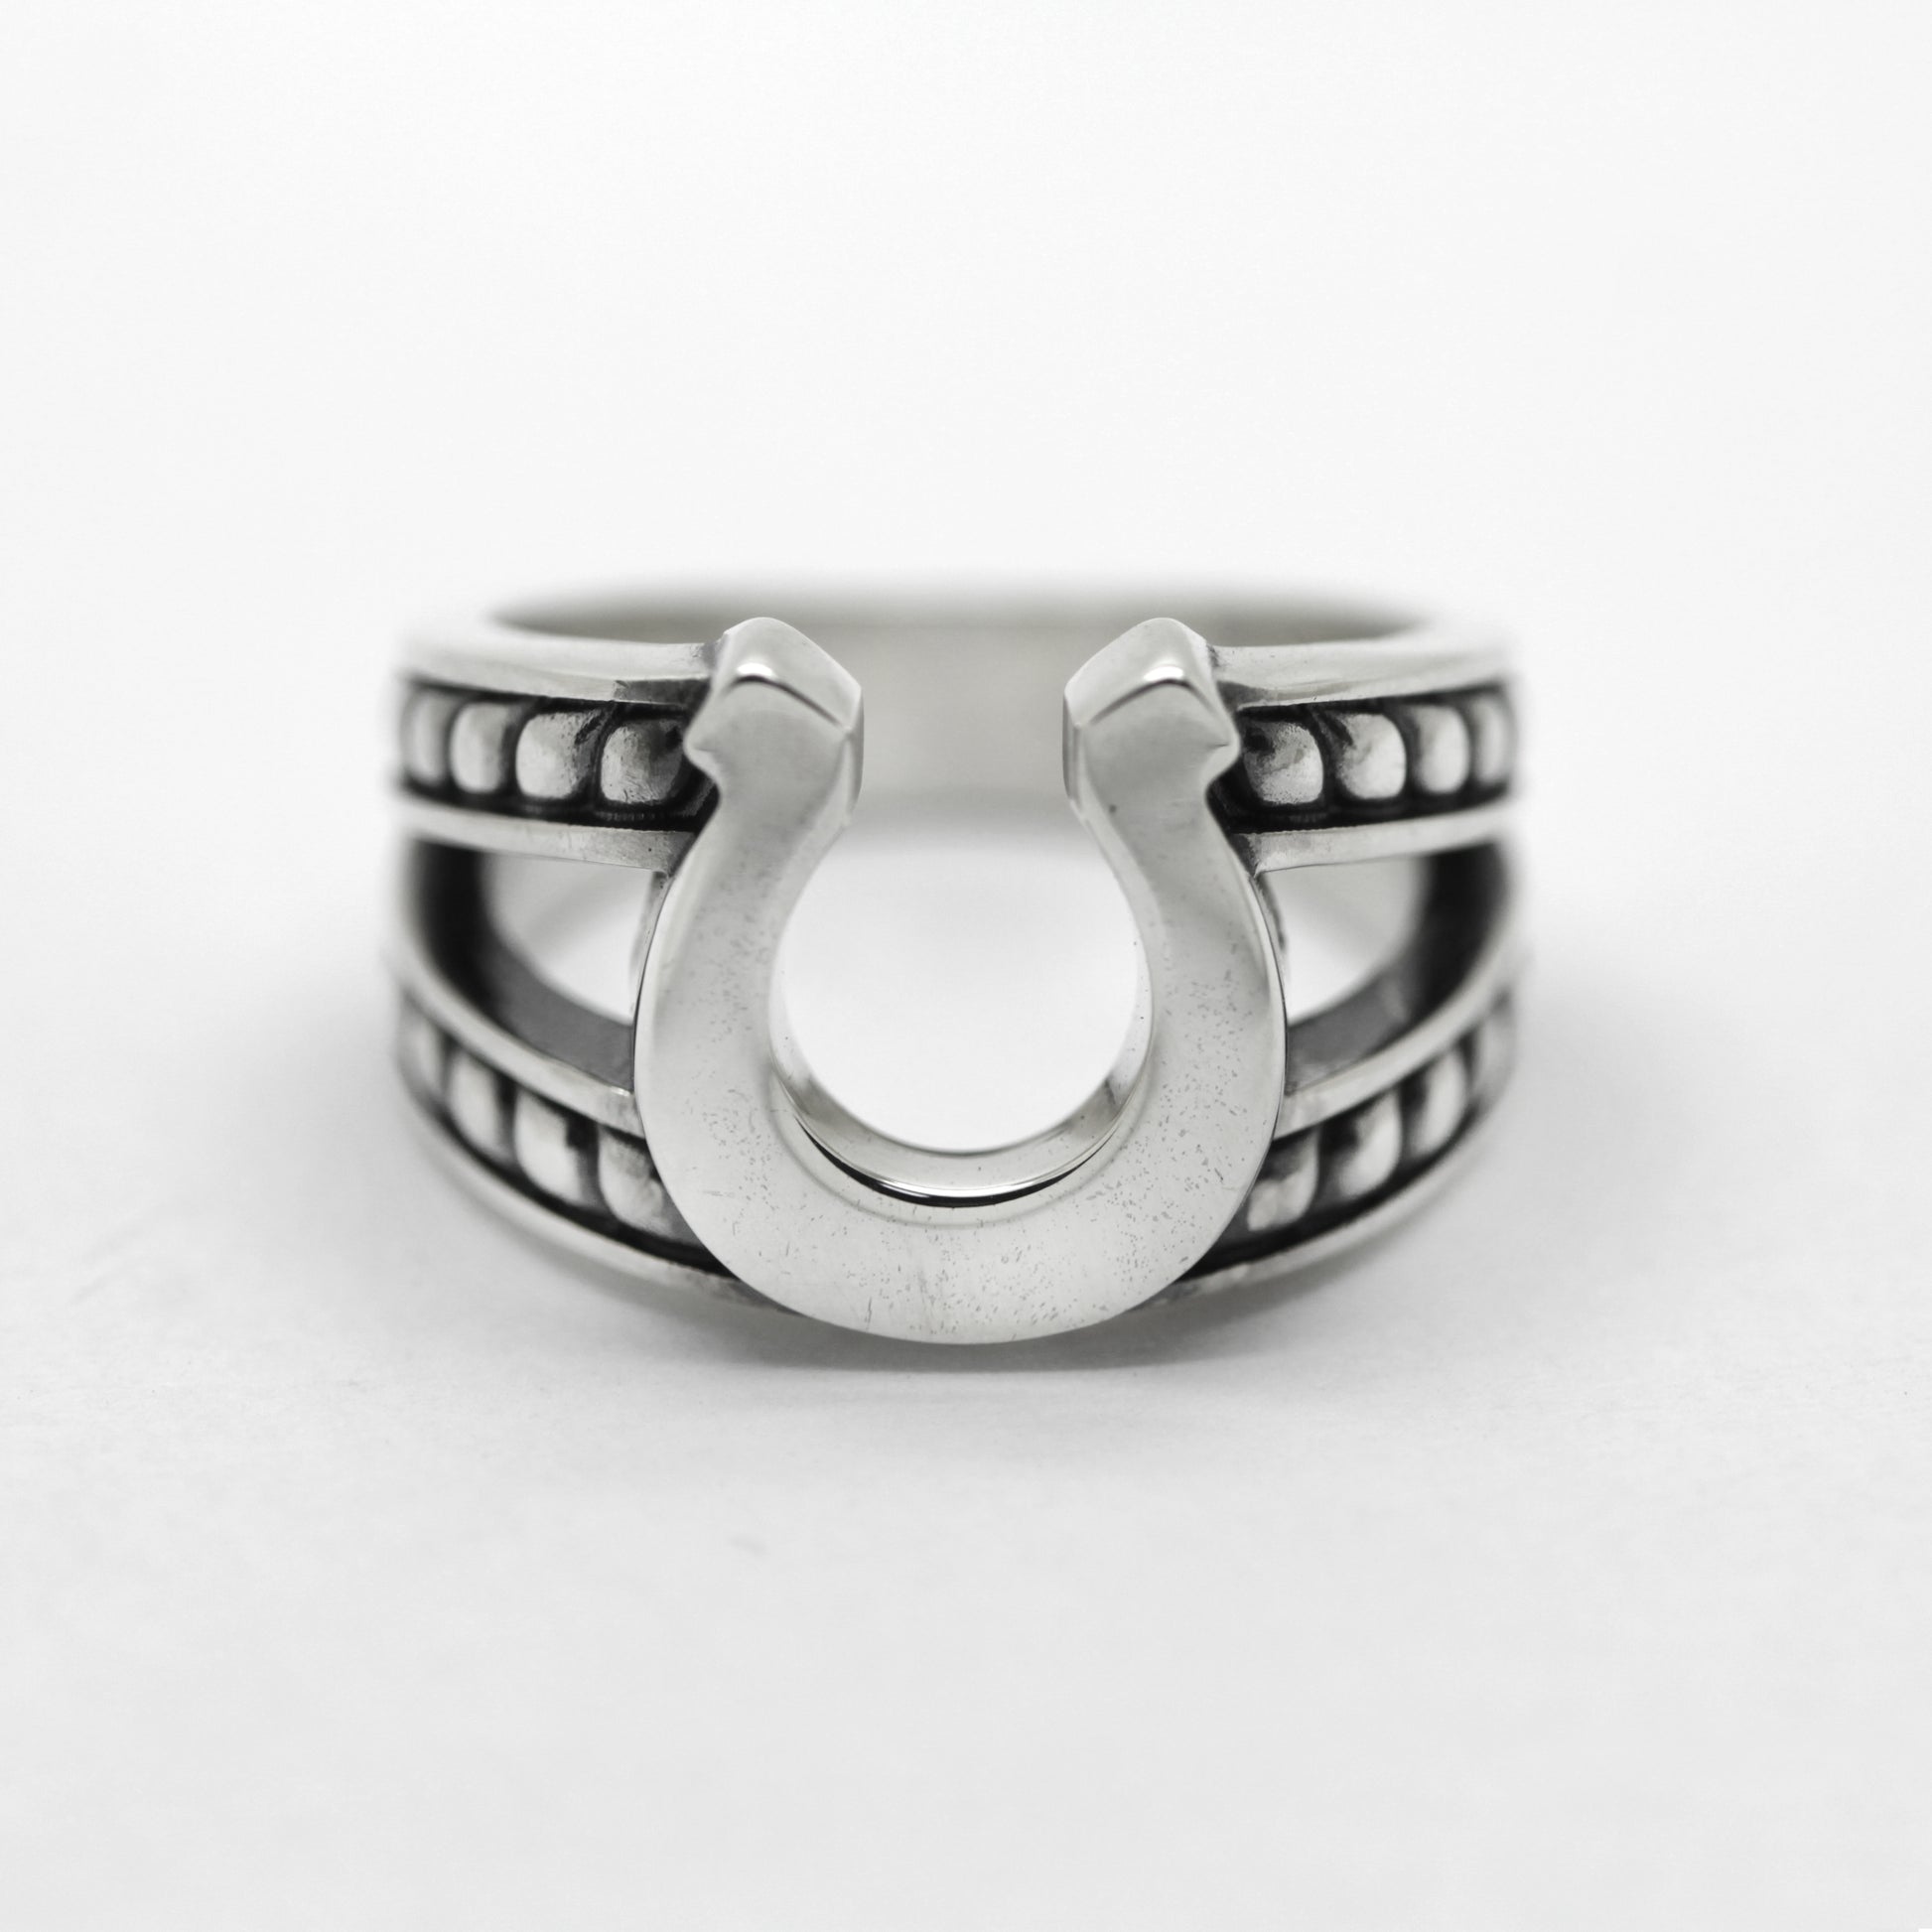 Horseshoe with a braded Rope Sterling Silver Ring Signet